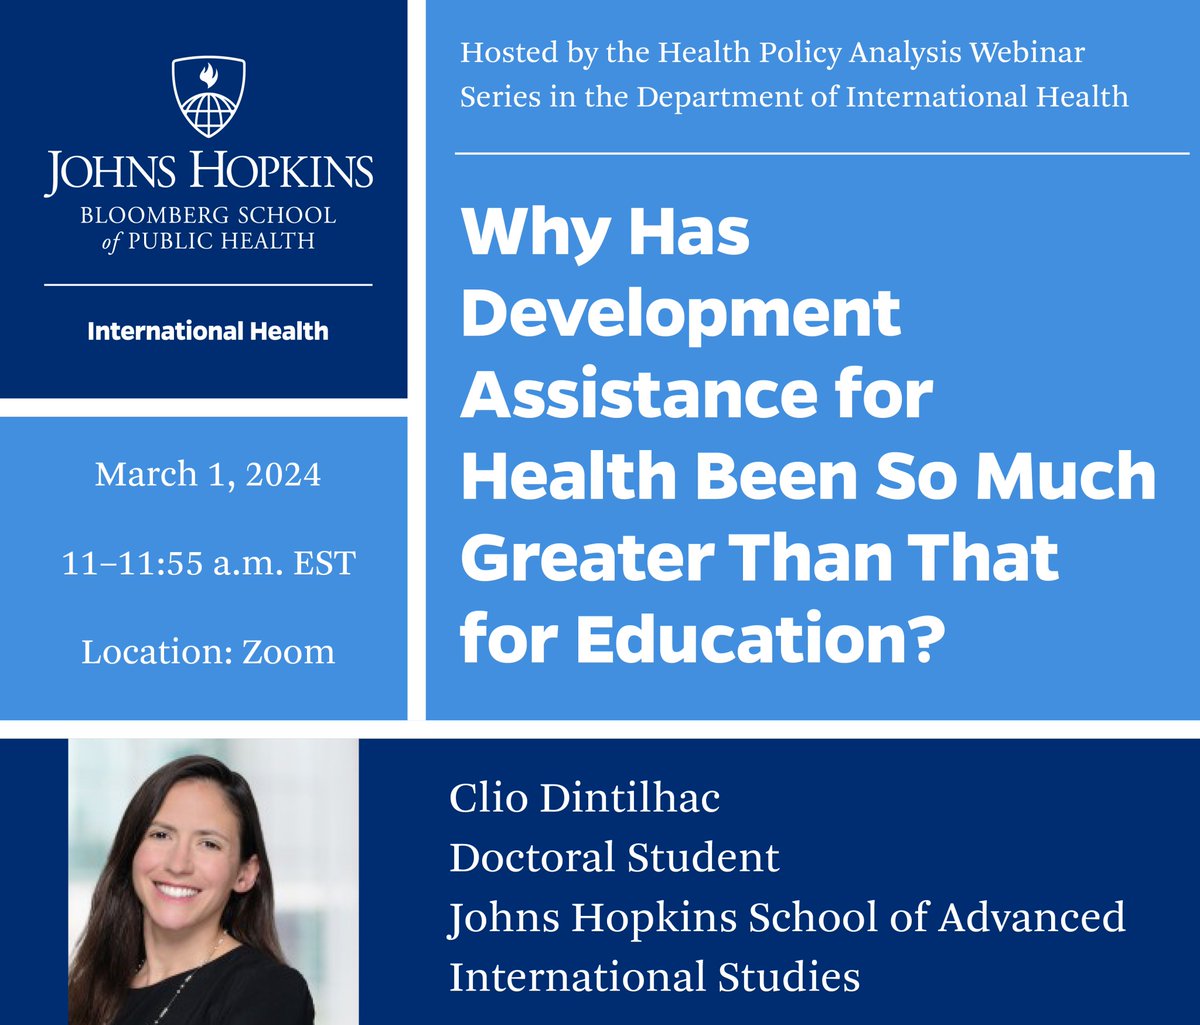 Tomorrow, the 2nd @JohnsHopkinsIH health policy analysis webinar in the spring series will cover “Why has development assistance for health been so much greater than that for education?” Join us online at 11 a.m. EST for the discussion. Link to register: jhubluejays.zoom.us/meeting/regist…